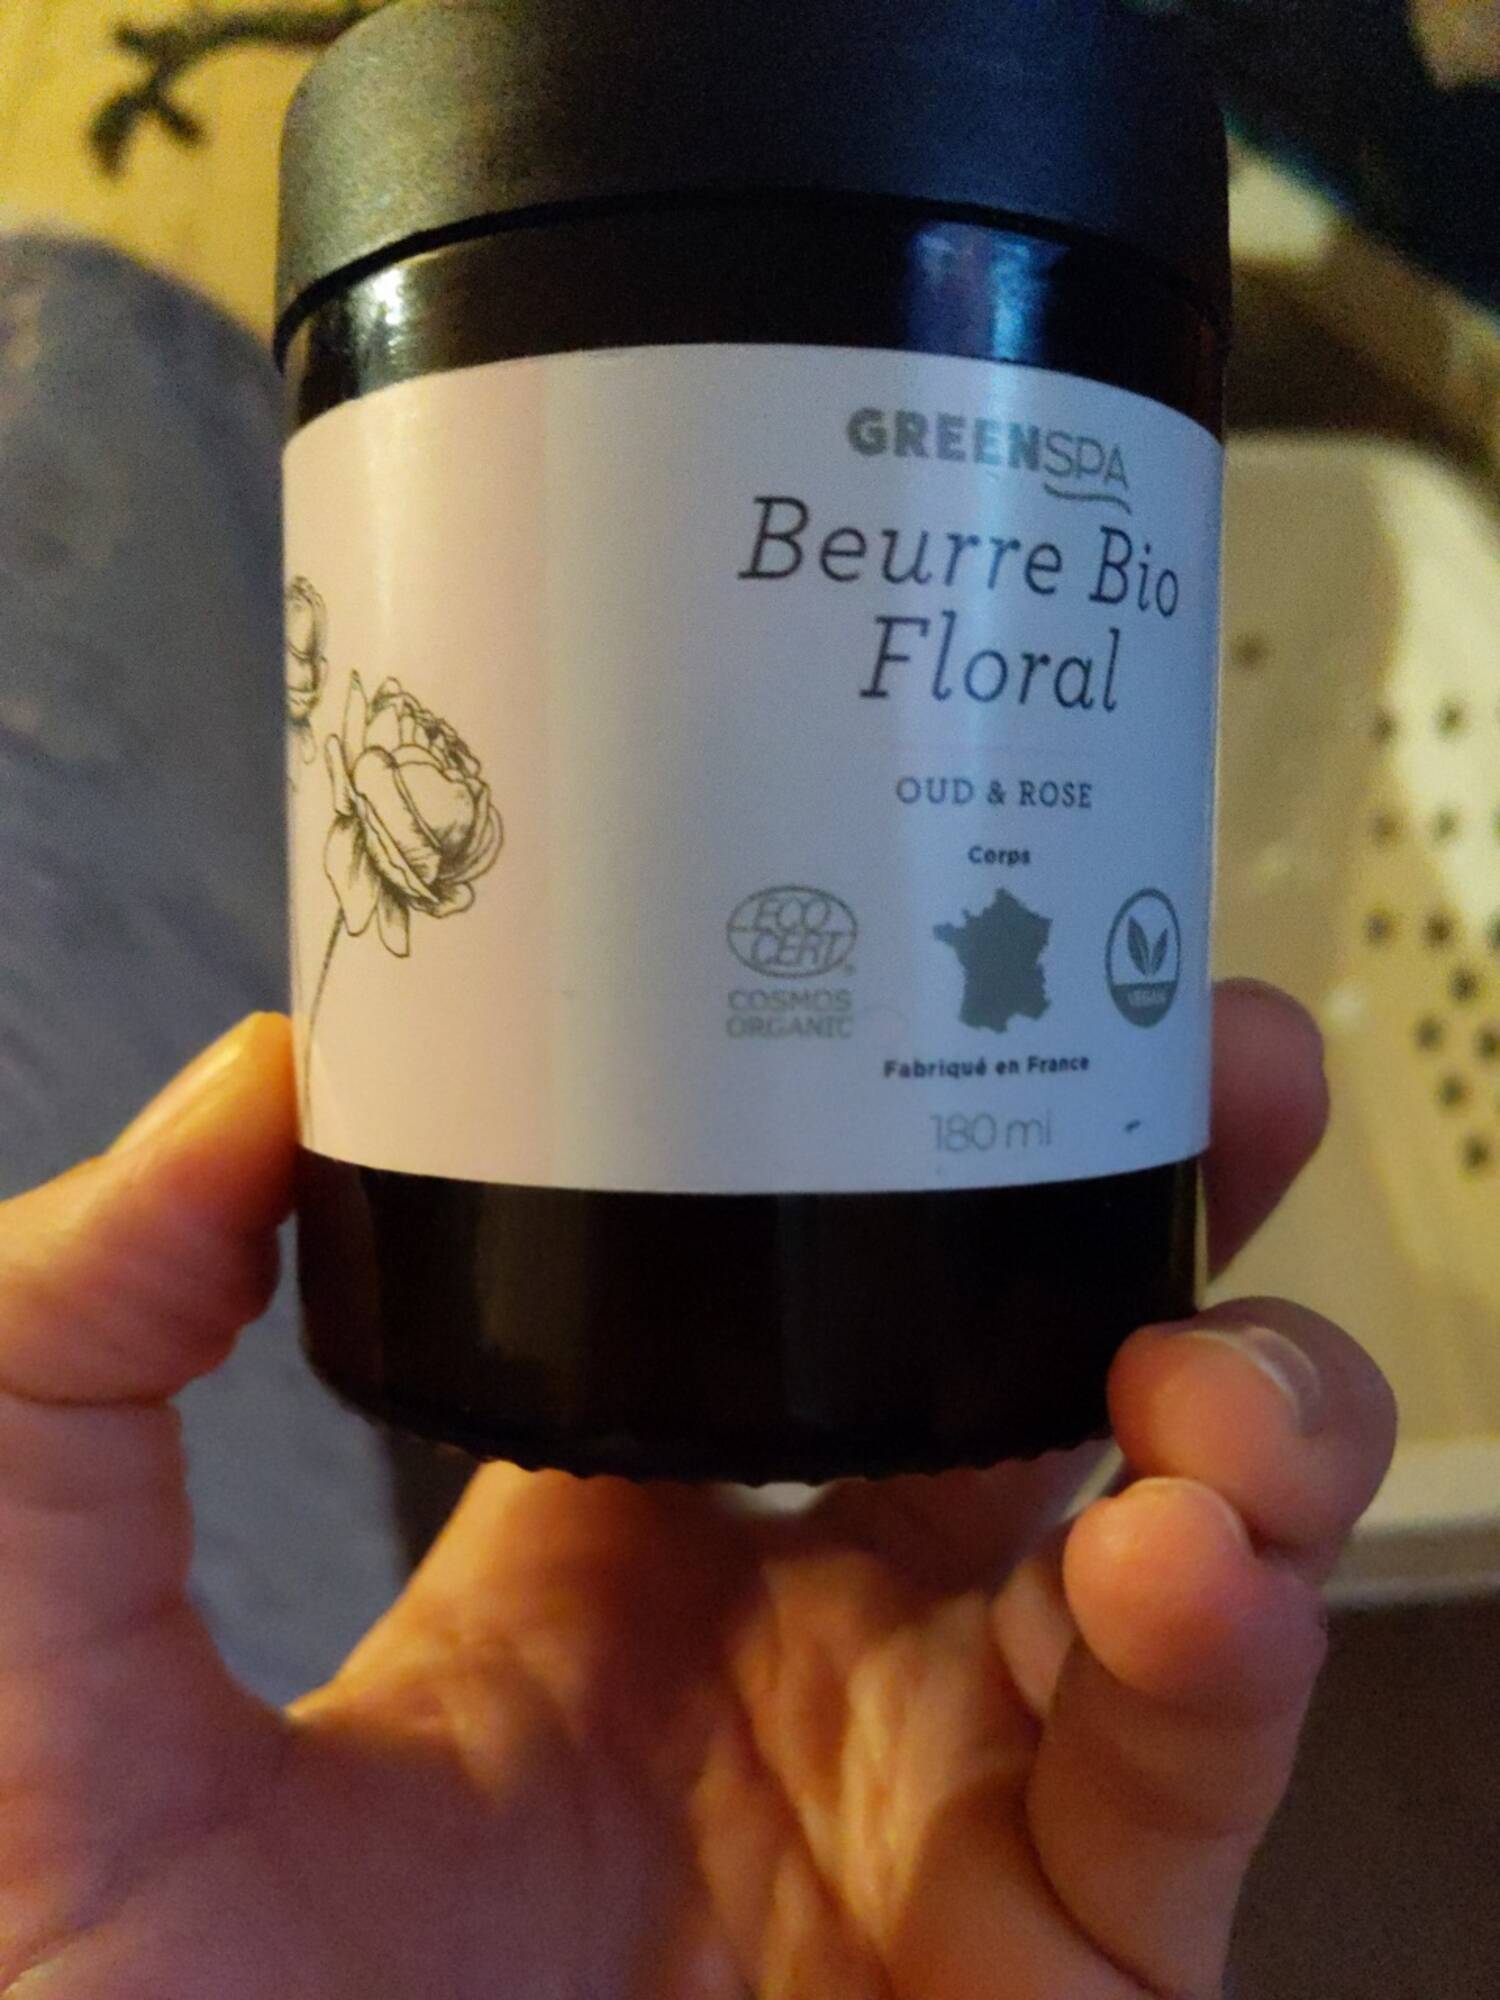 GREEN SPA - Beurre bio floral oud & rose